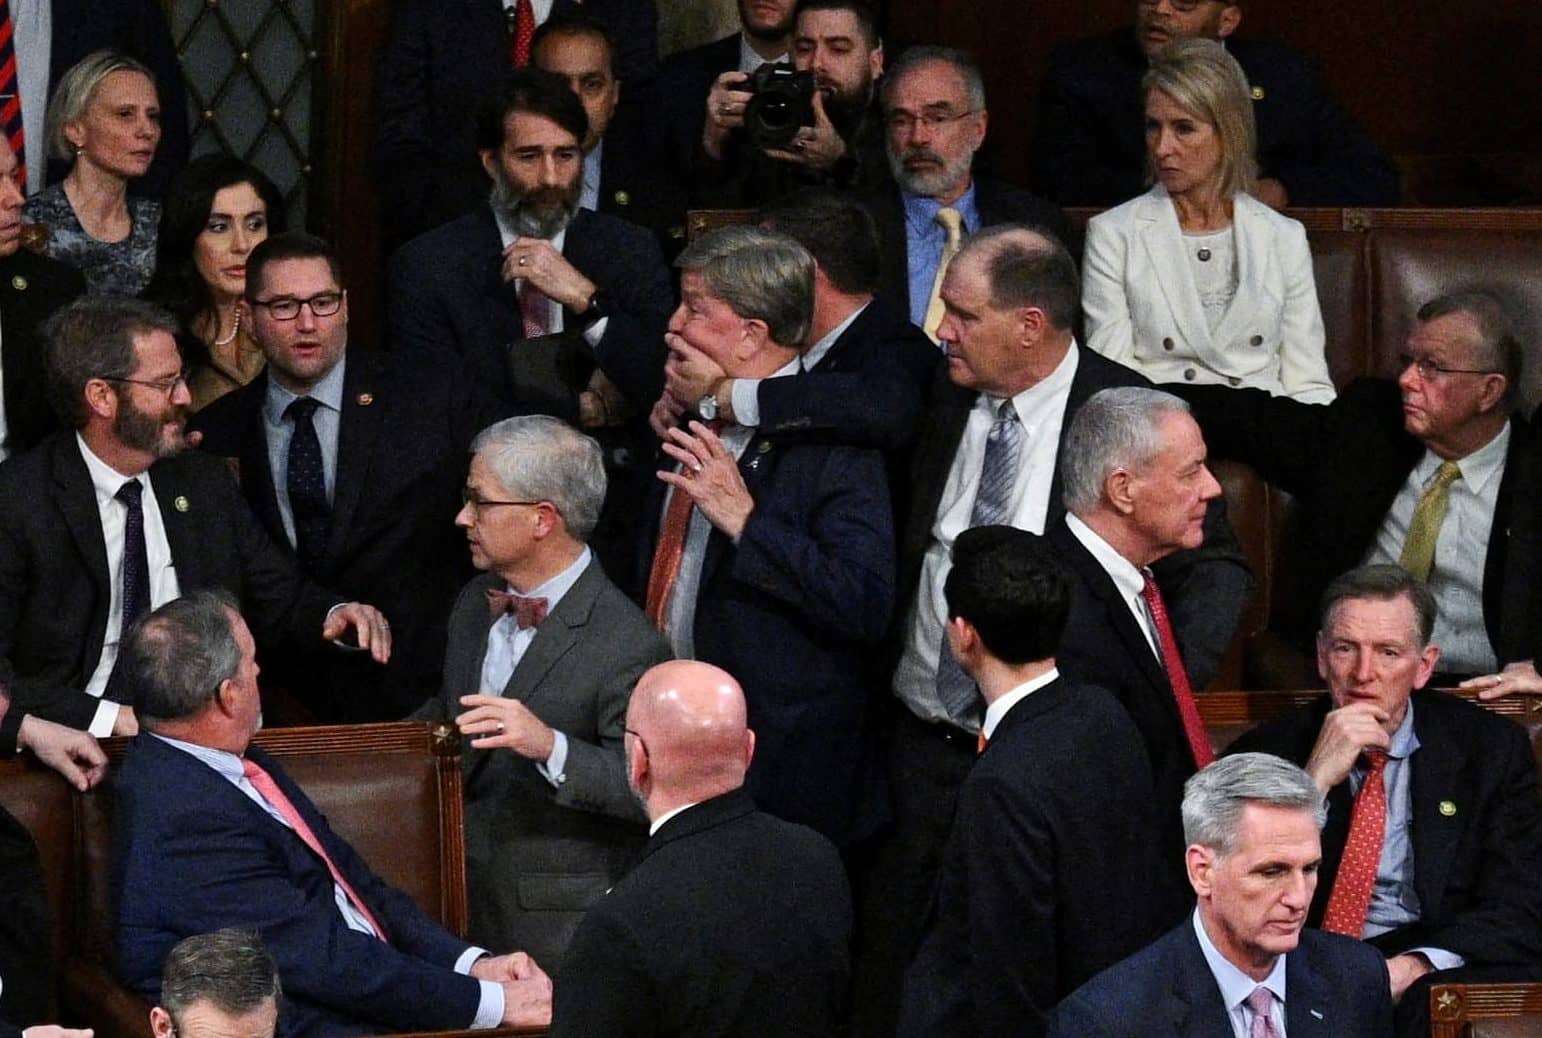 u-s-representatives-gather-to-try-to-elect-a-new-speaker-of-the-house-at-the-u-s-capitol-in-washington